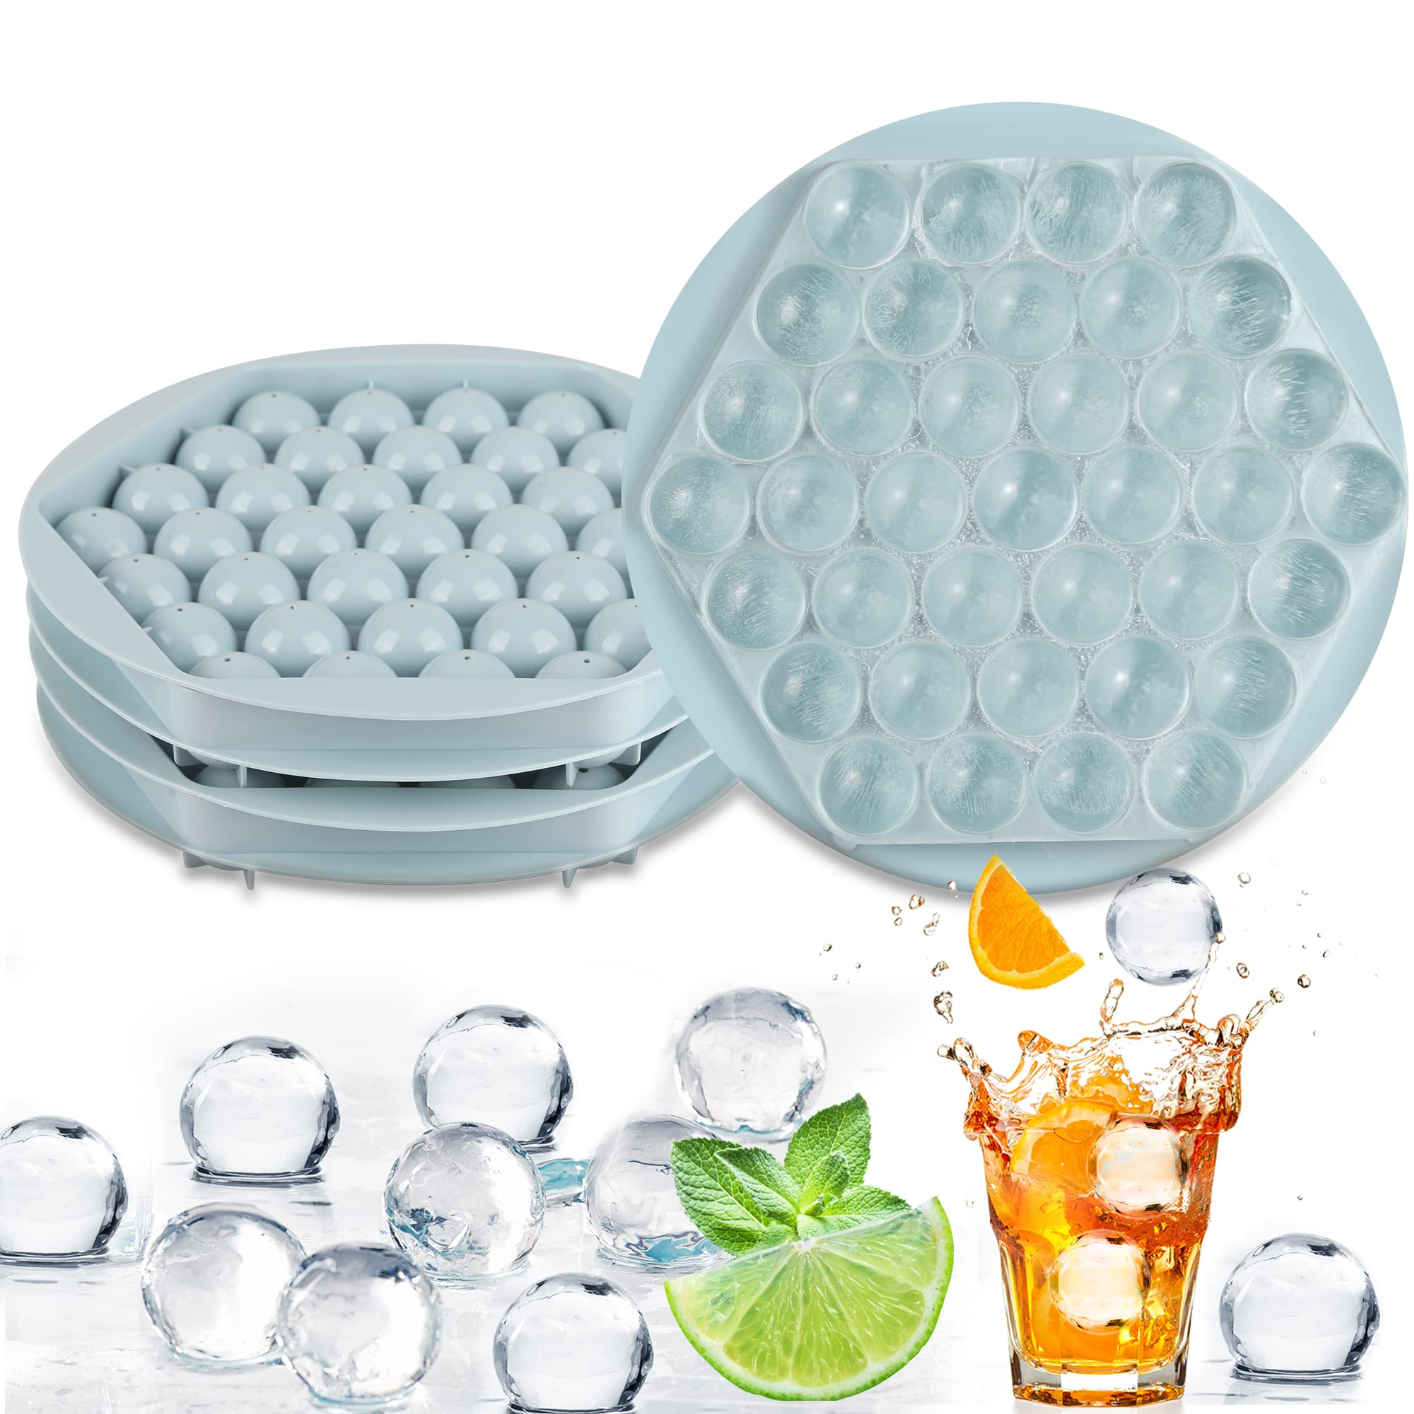 Hexagon Round Ice Cube Tray With Lid,Mini Circle Ice Ball Maker Mold for Freezer,37 PCS Sphere Ice Chilling Cocktail Whiskey Tea & Coffee